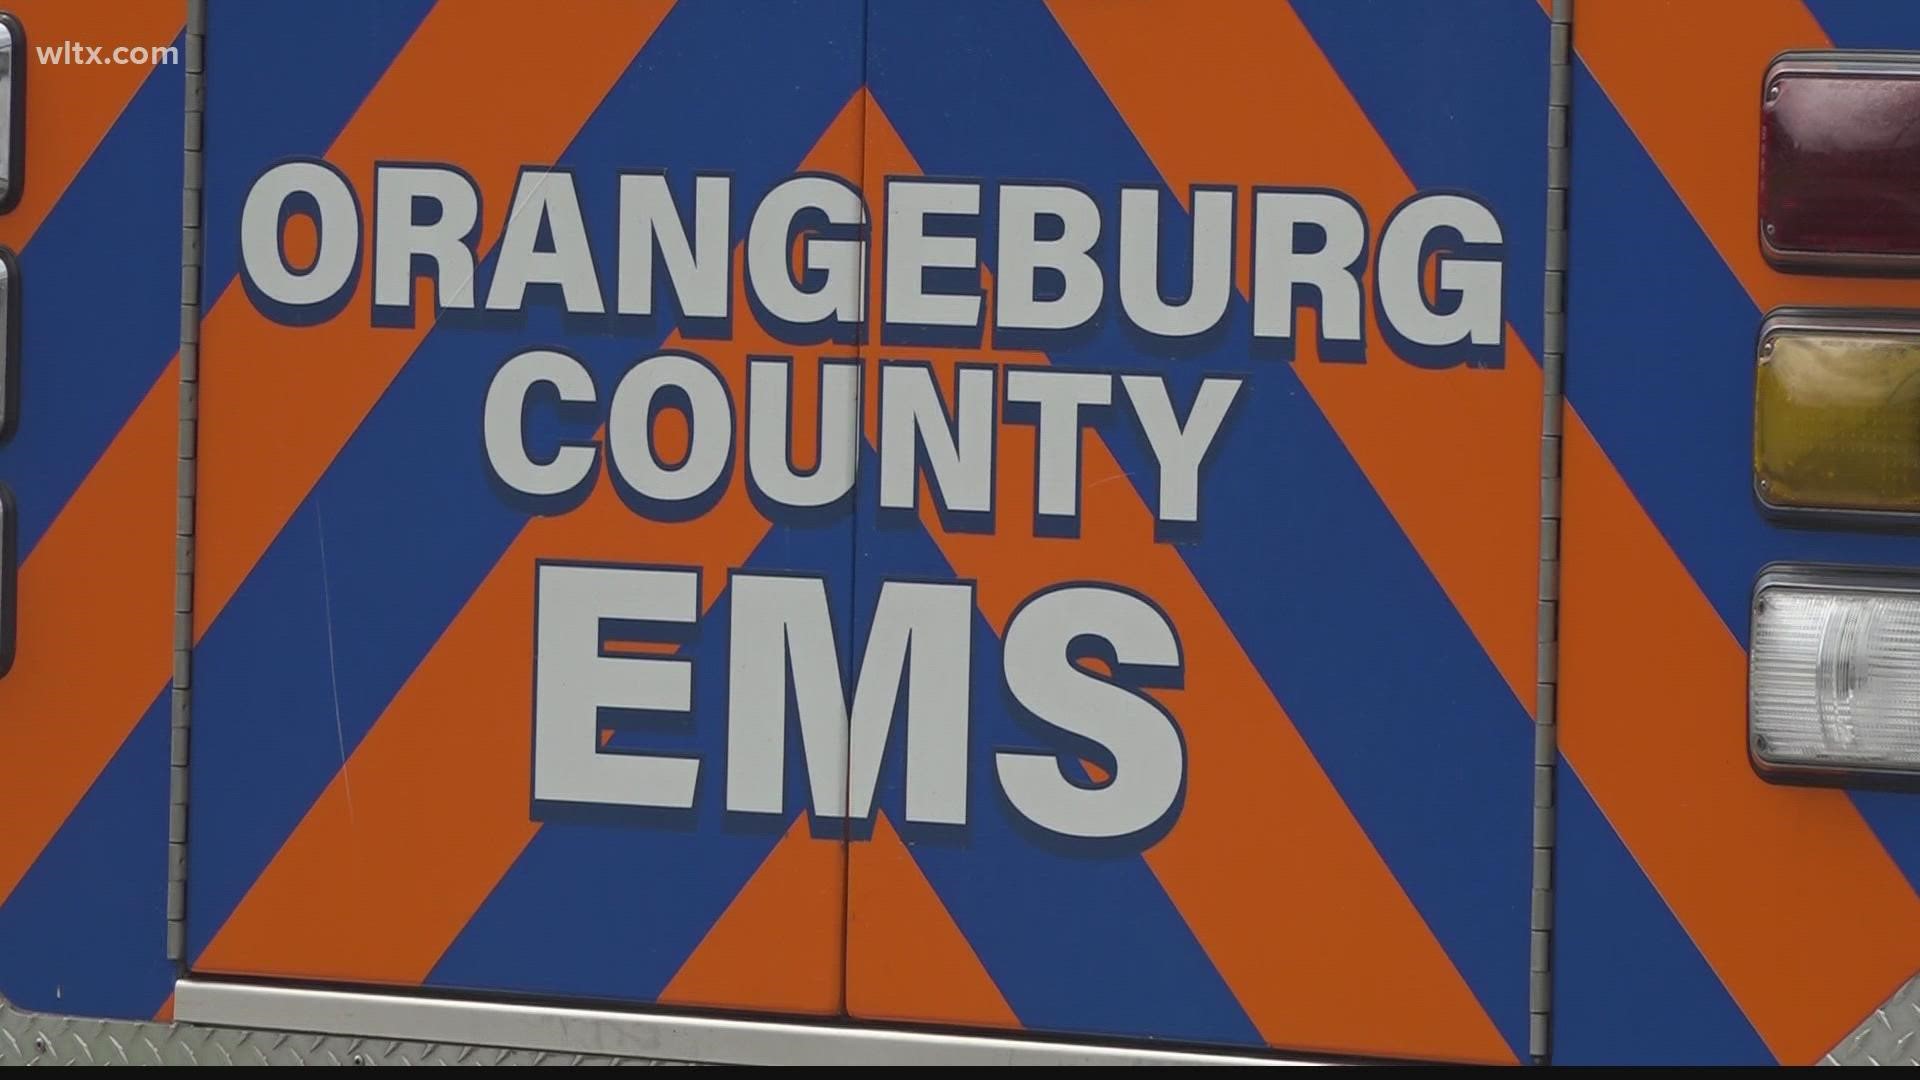 The program in Orangeburg county aims to help grow more EMS workers with students.